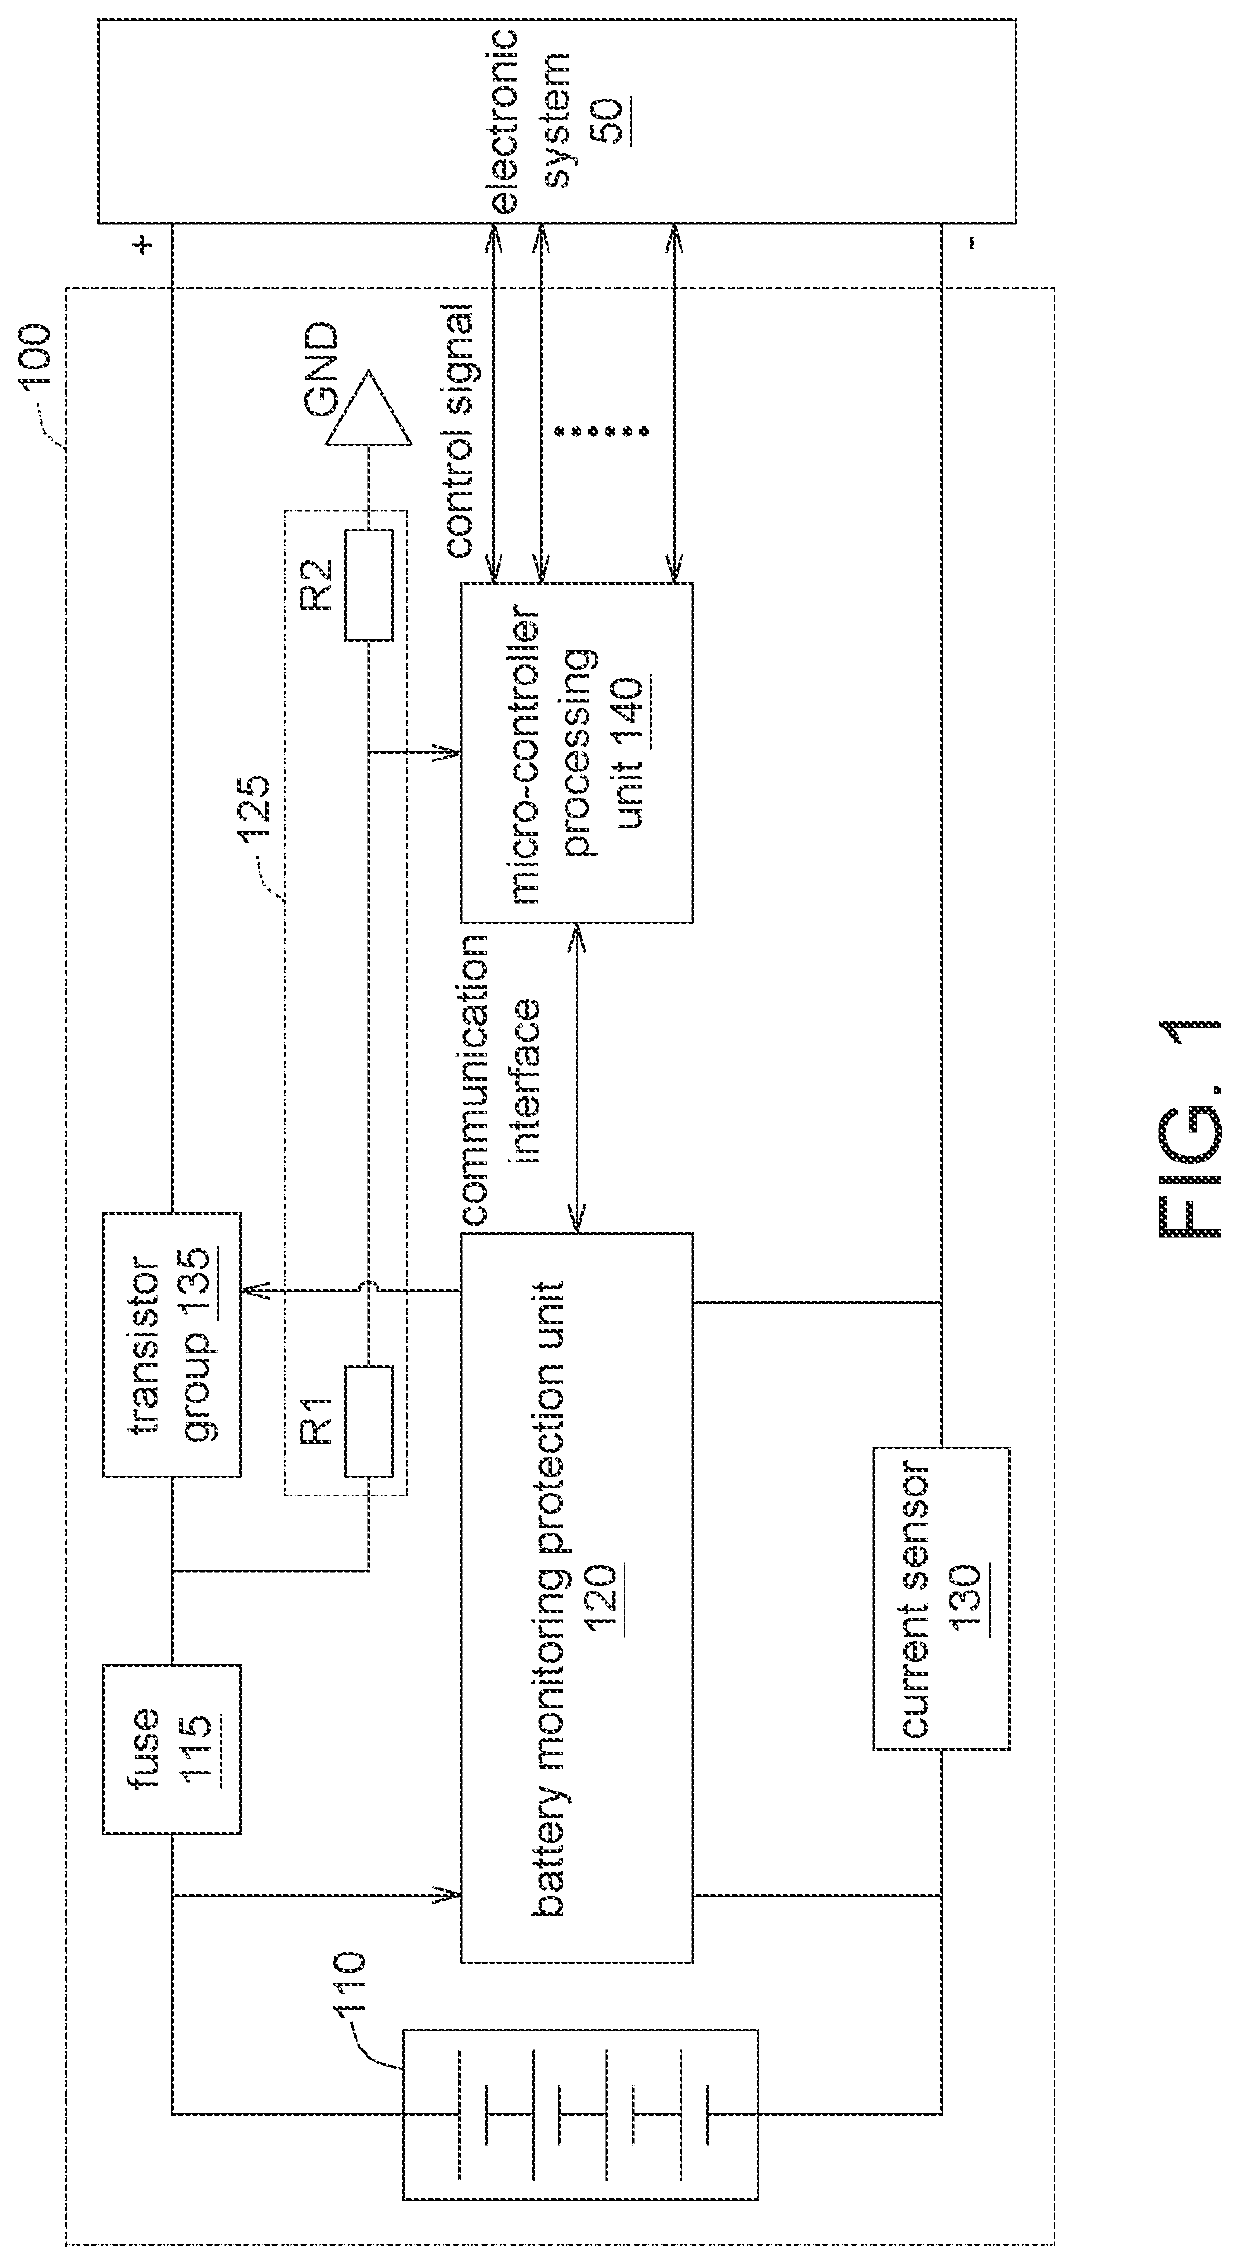 Backup power supply for electronic system and operation method thereof